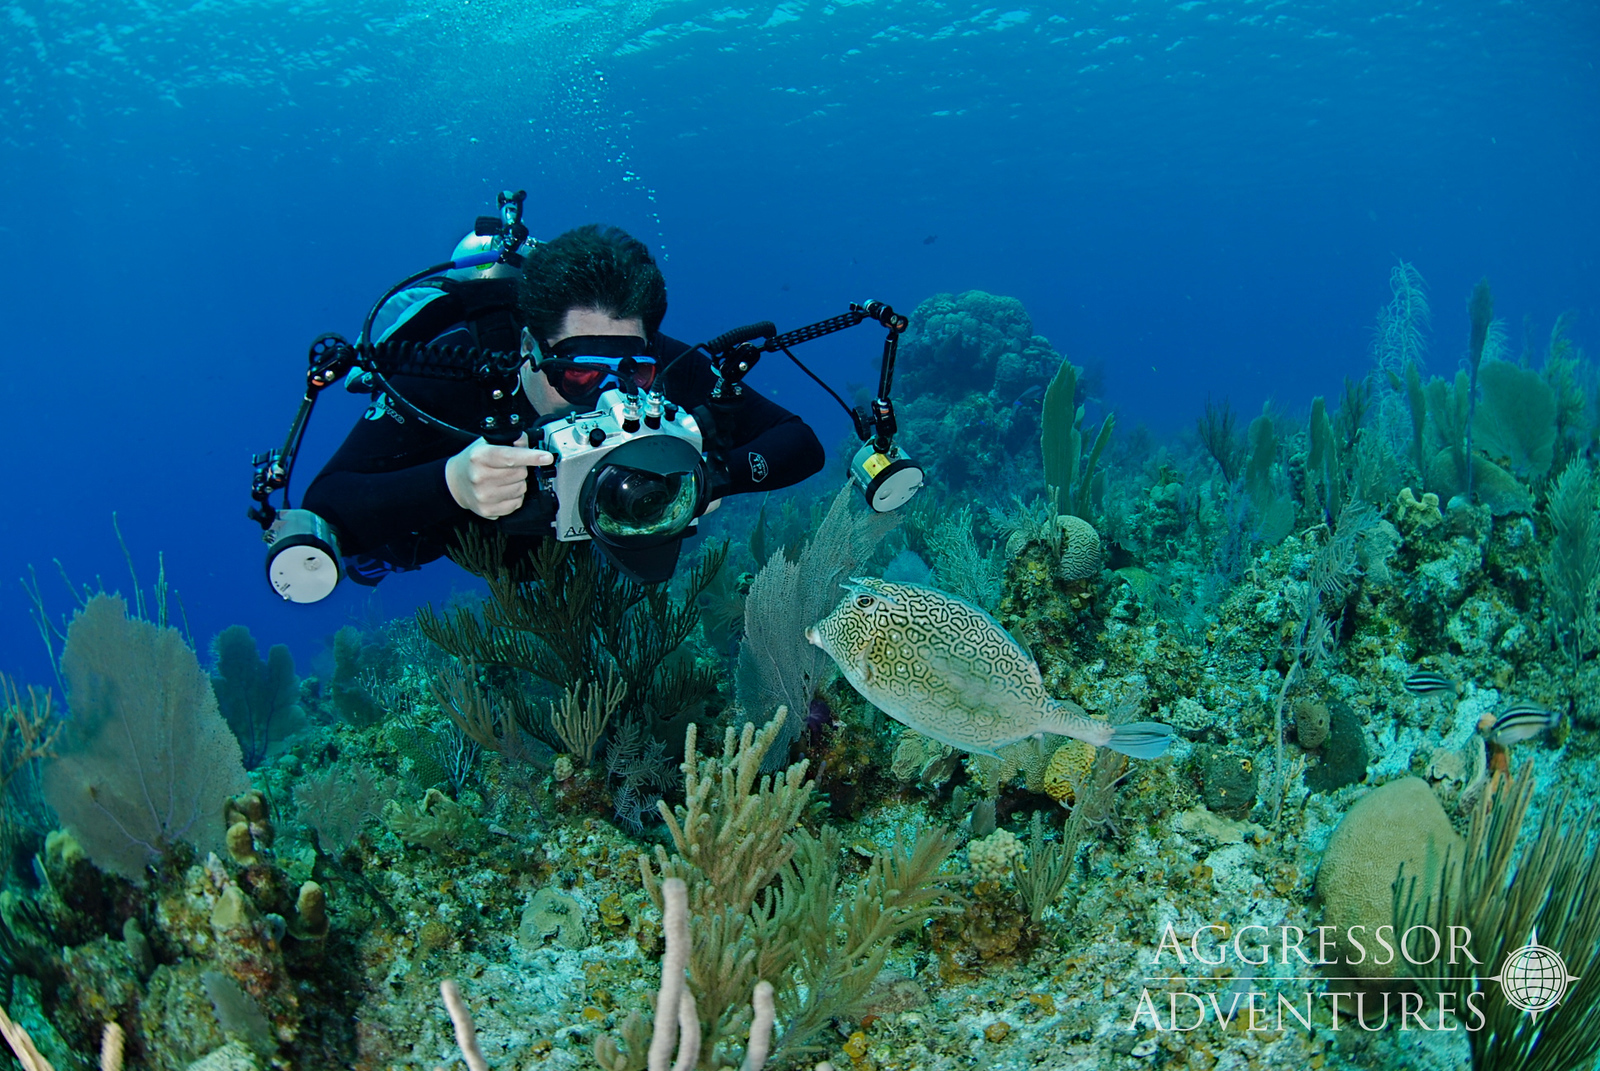 A fish hovers in the water above a coral as a diver holds a camera in front of it.